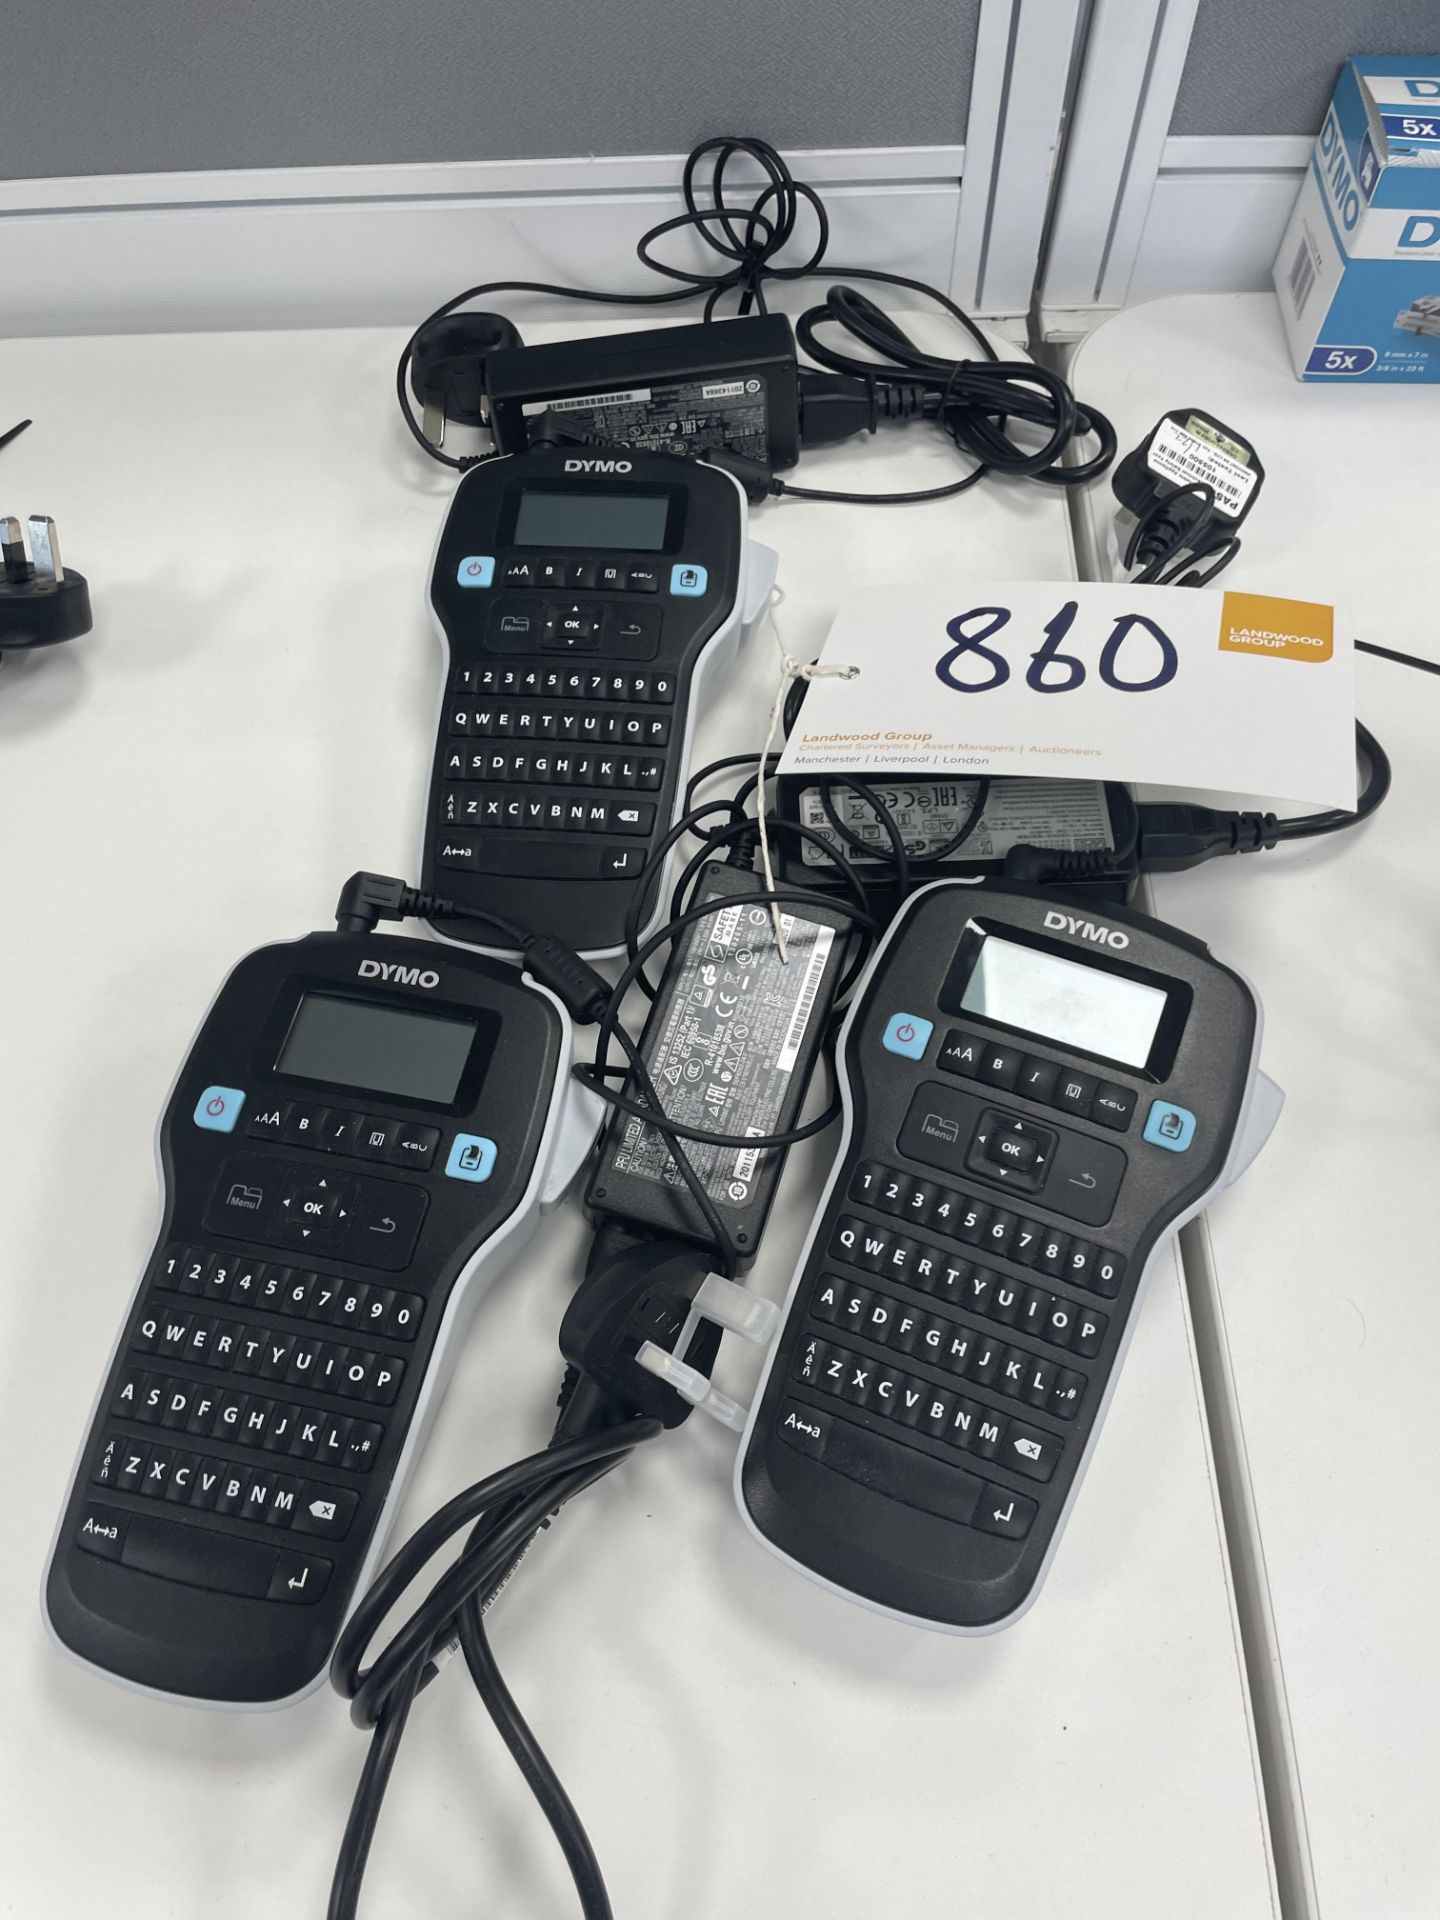 3 Dymo LabelManager 160 hand held thermal label printers.